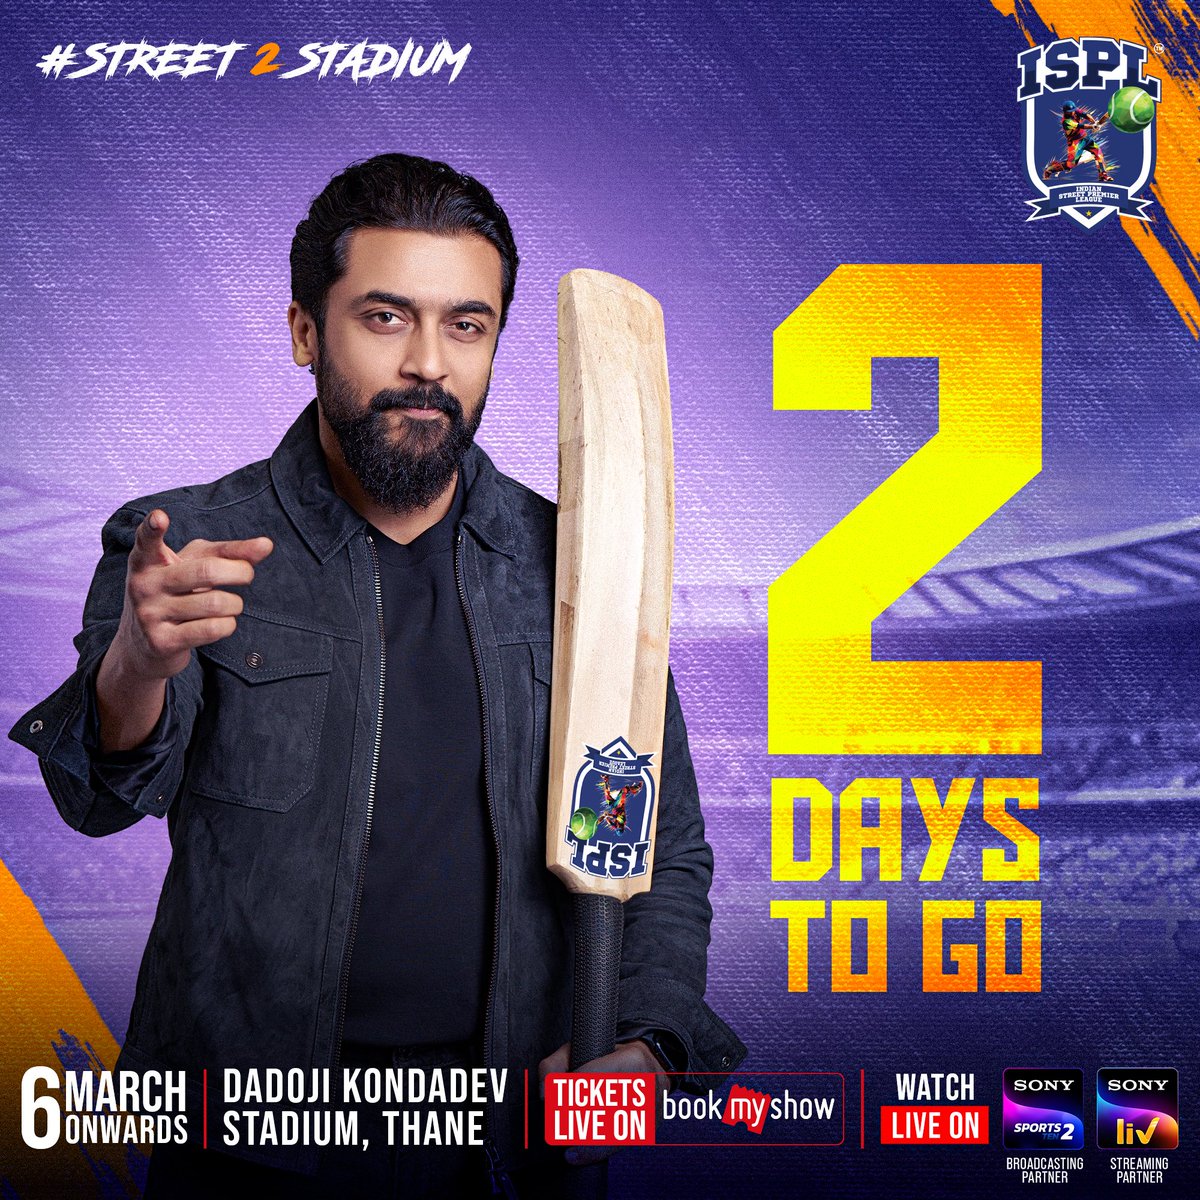 Ab bas ISPL-t10 ka hoga bol bala! So pick your side and get ready to cheer for them as loud as you can. Only 2 days to go! Book your tickets on book my show. #Street2Stadium #ISPL #NewT10Era #EvoluT10n #ZindagiBadalLo #BookMyShow #OpeningCeremony